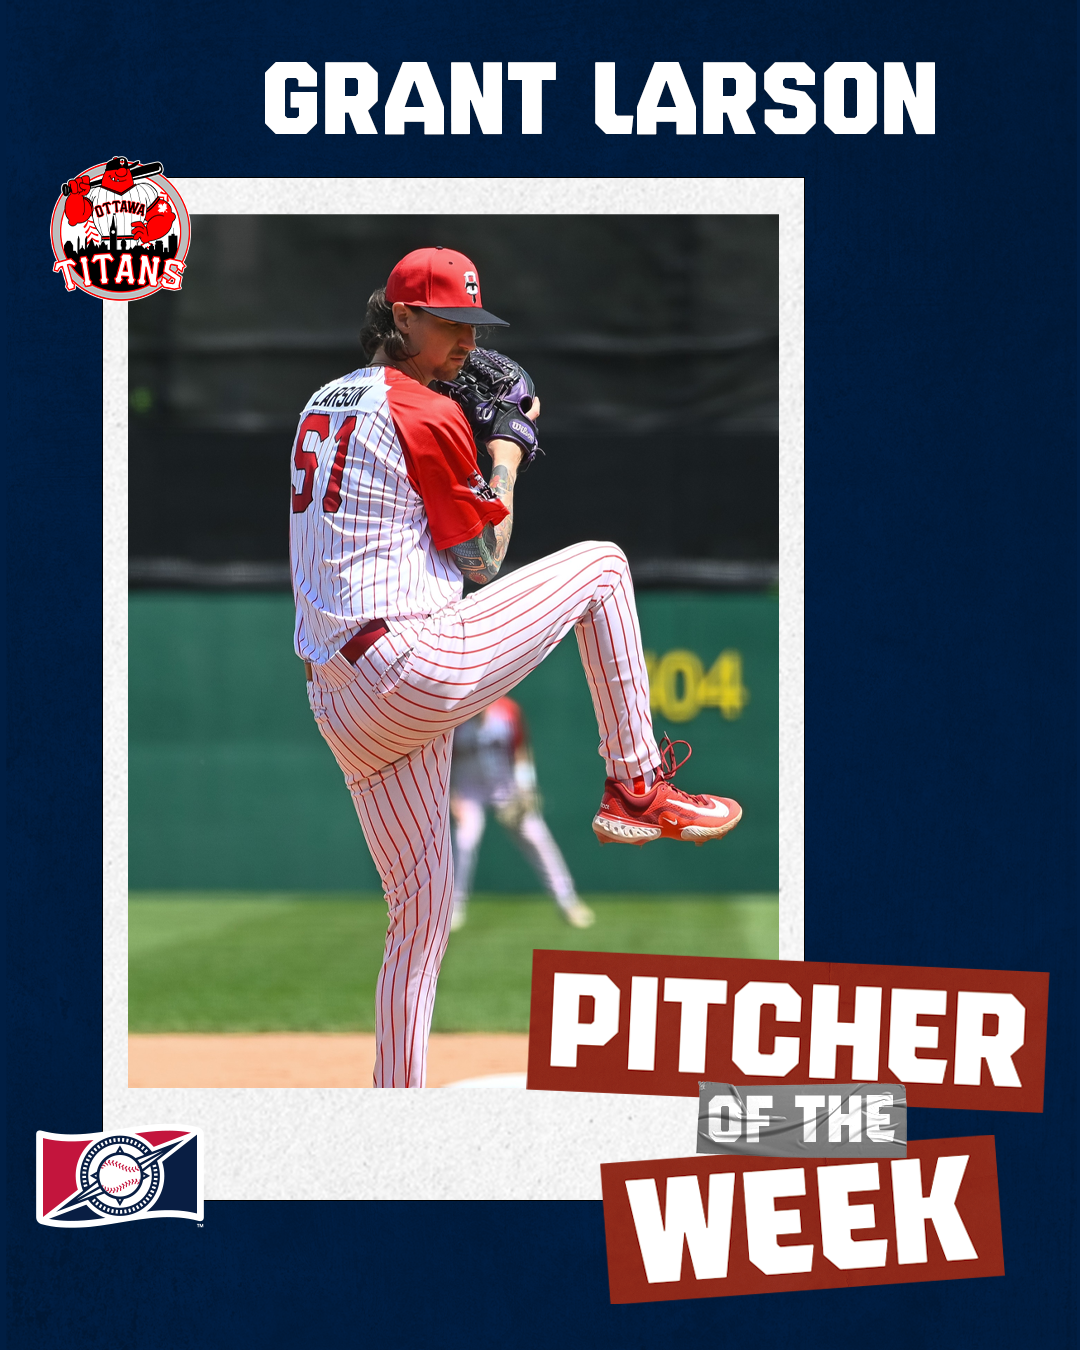 GRANT LARSON WINS PITCHER OF THE WEEK